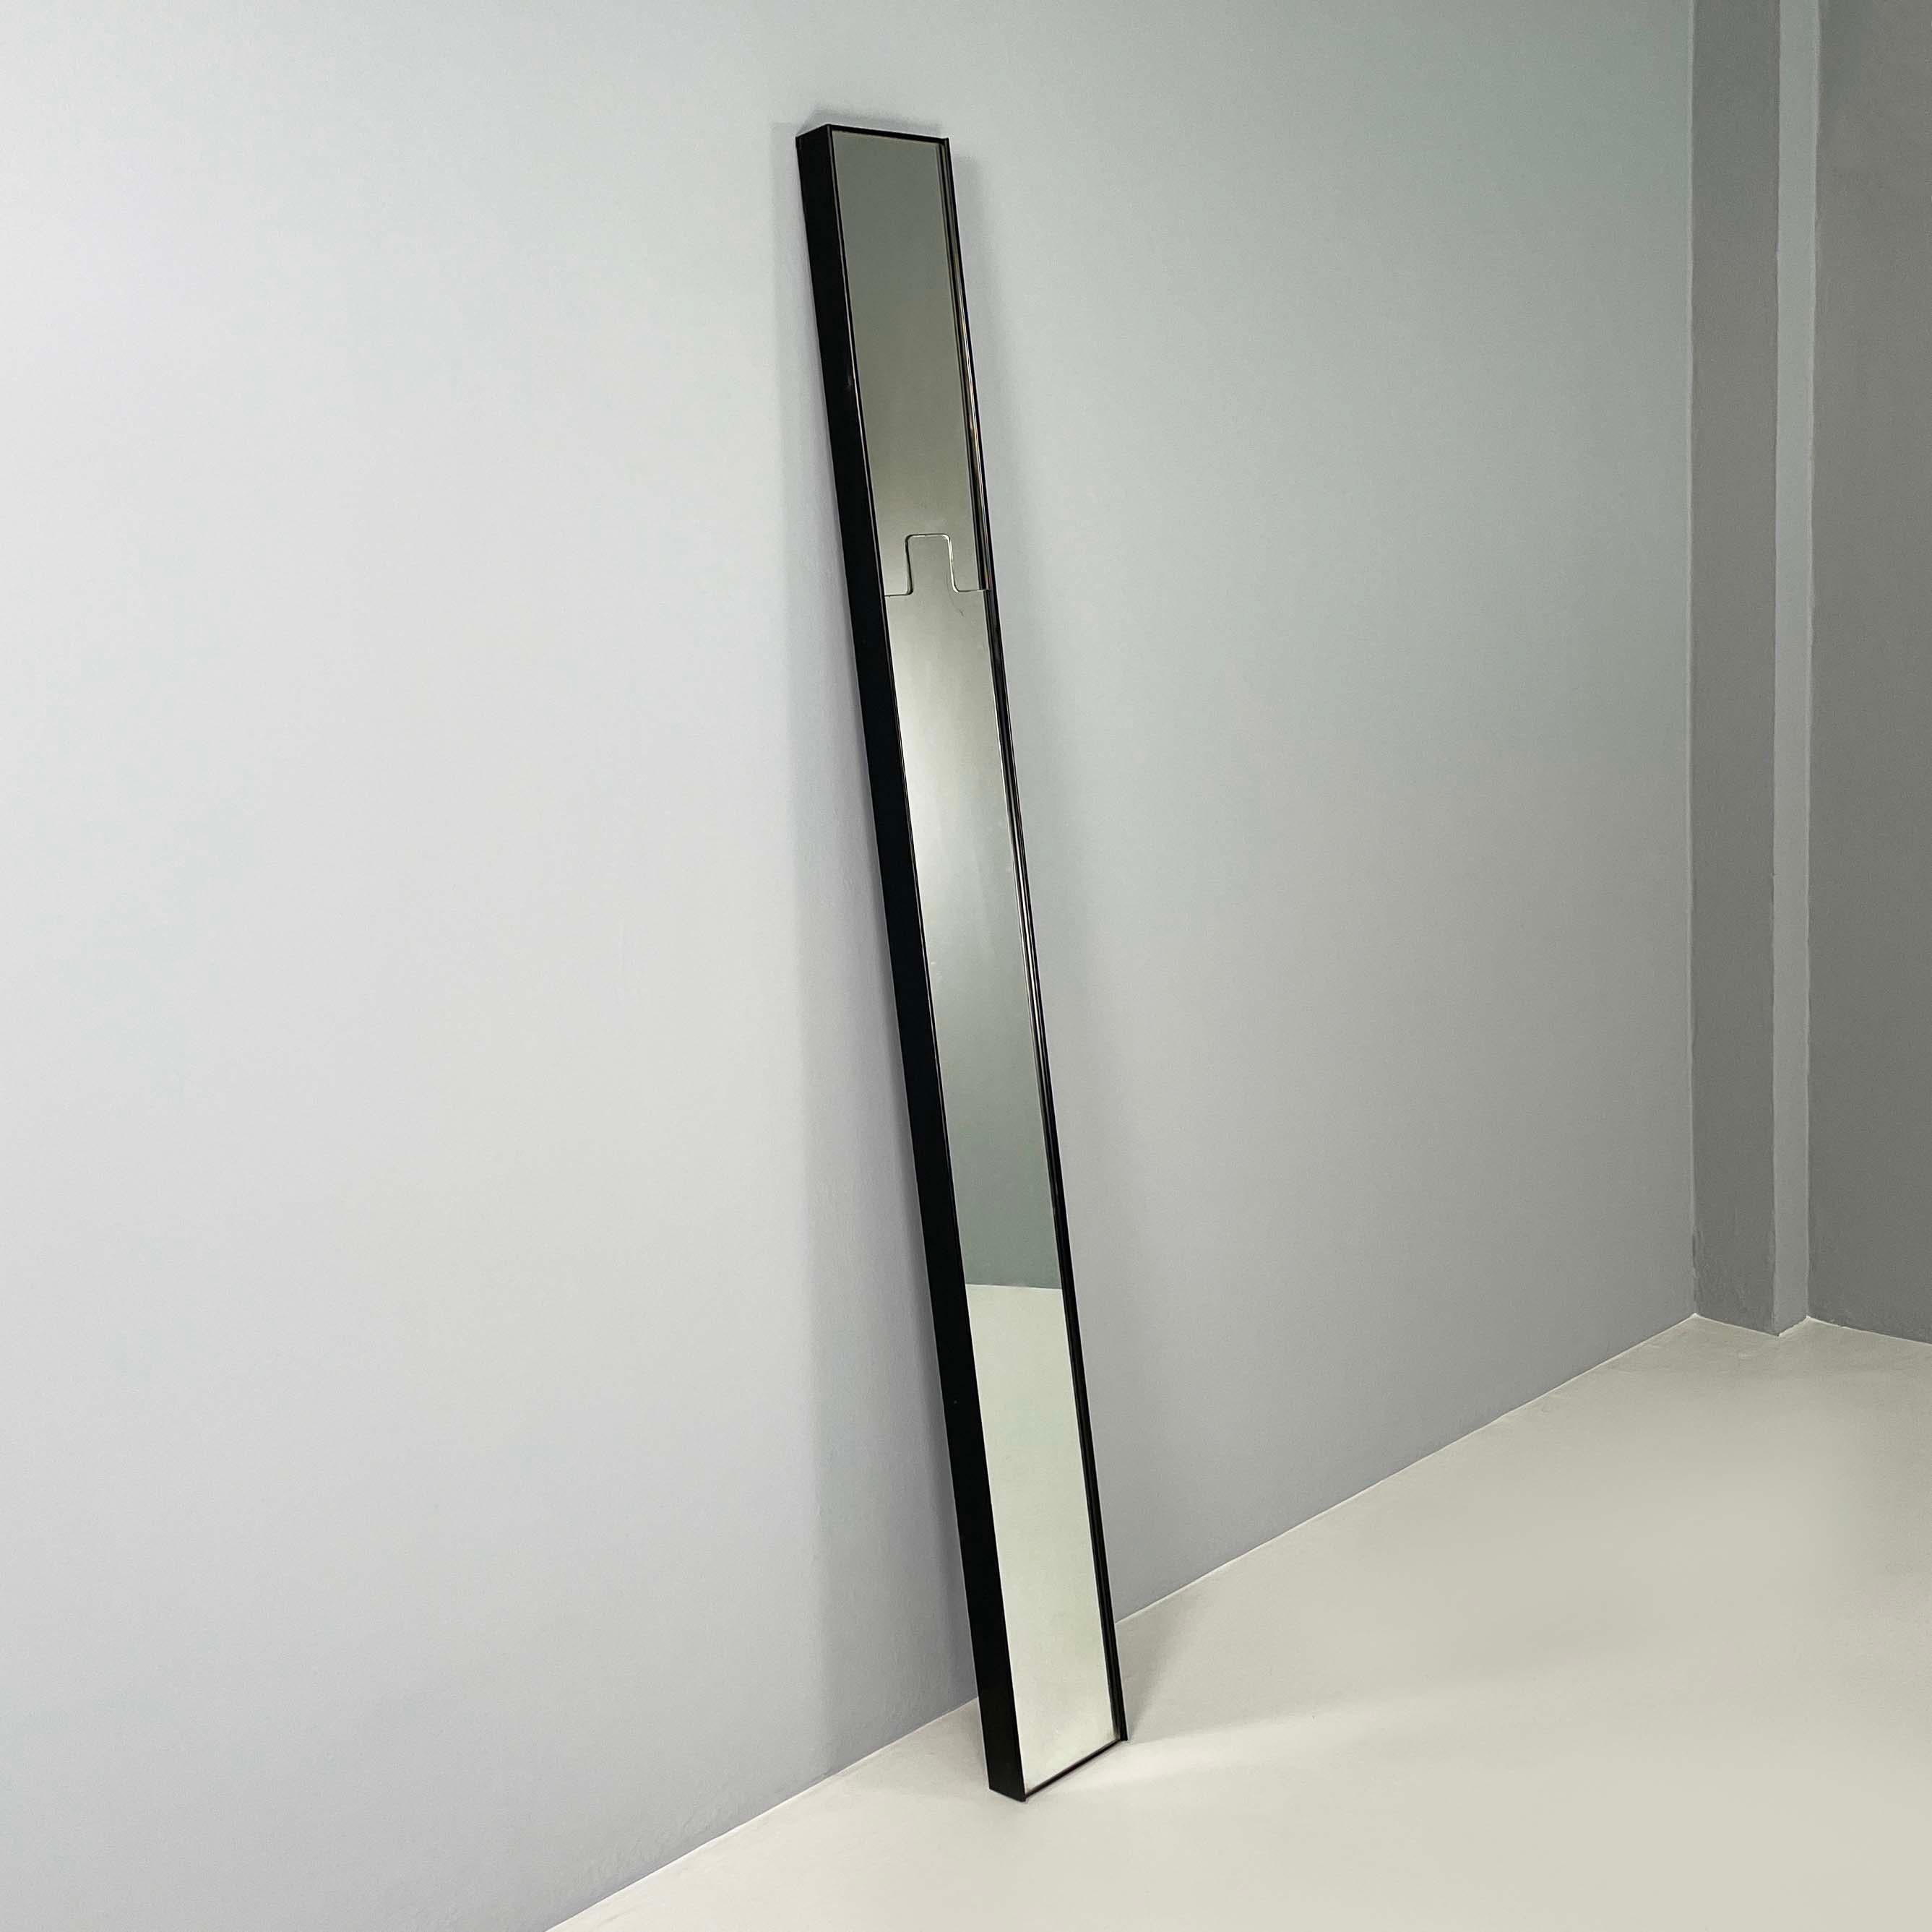 Italian modern Wall mirror and coat hanger Gronda by Luciano Bertoncini for Elco, 1970s
Iconic and fantastic wall mirror mod. Gronda composed of a rectangular module. The frame structure is made of black plastic. The peculiarity of this mirror is